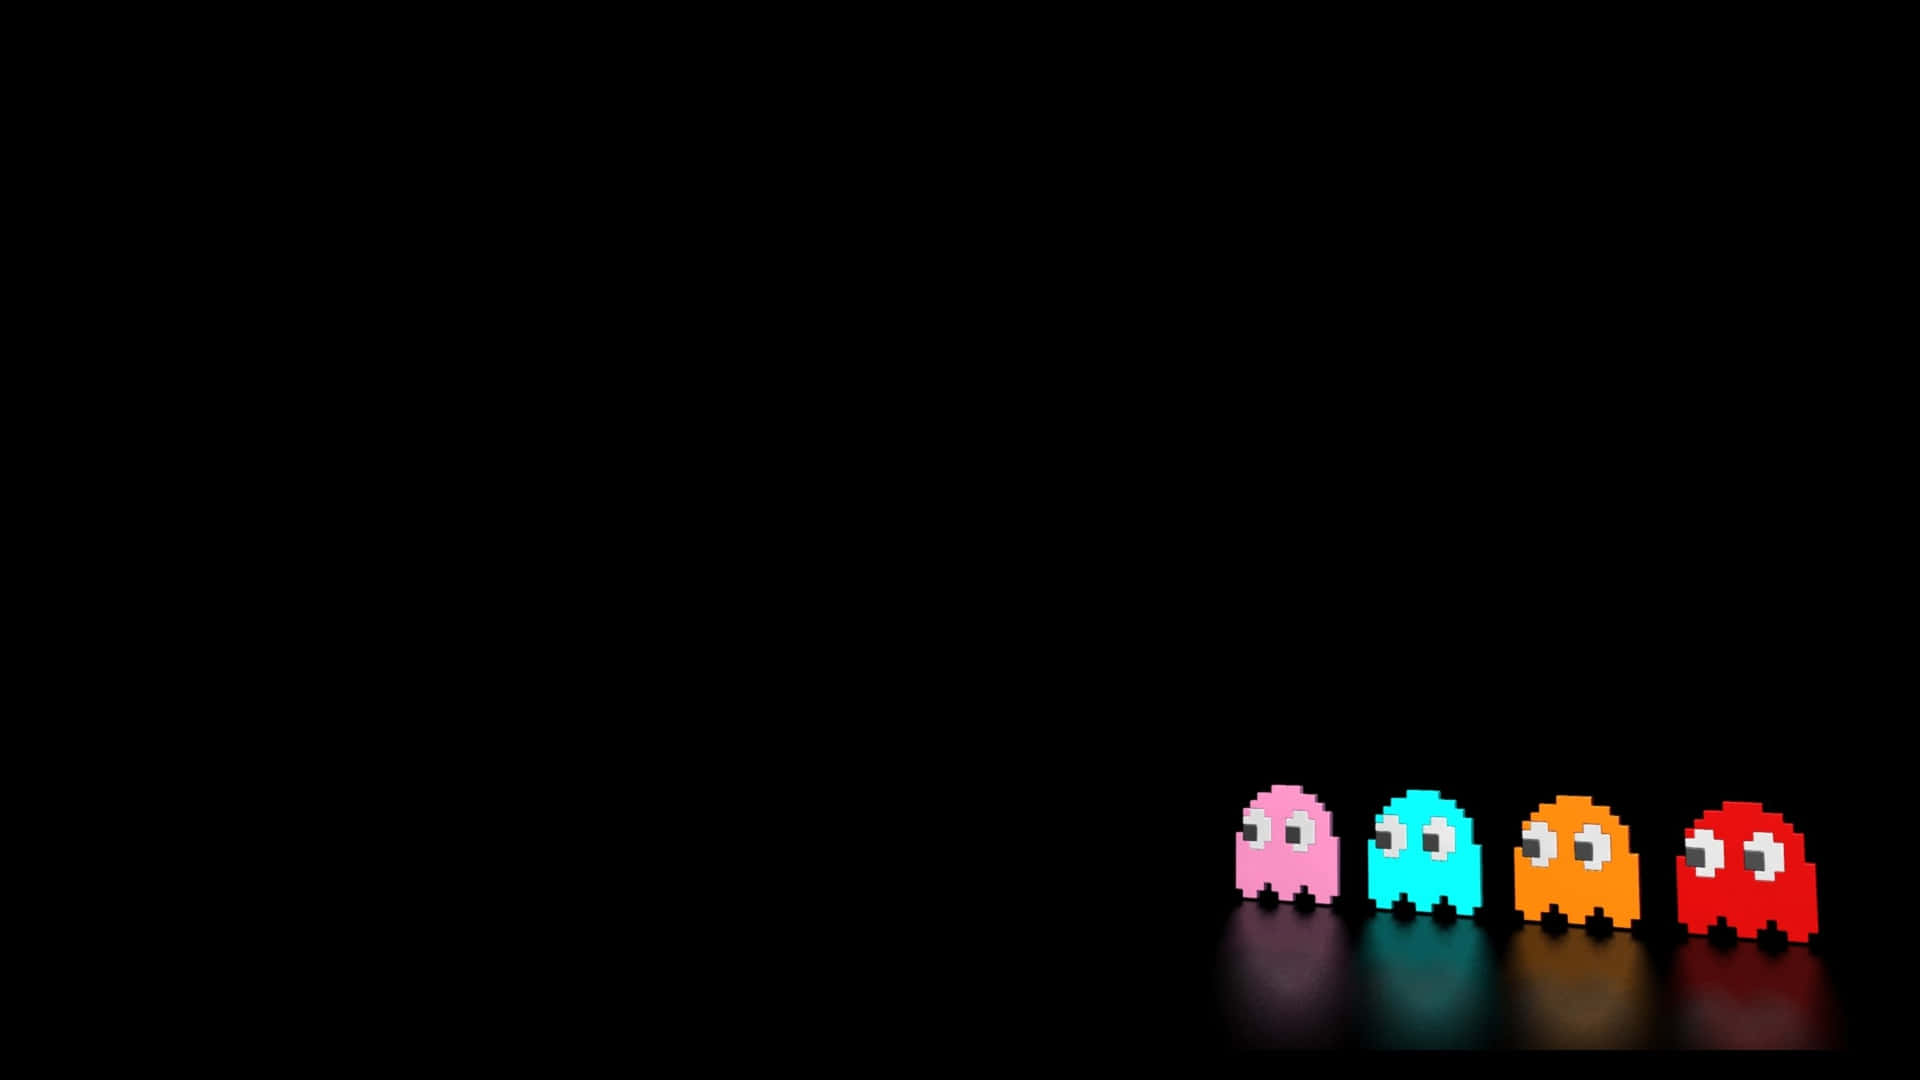 Endearing Gaming Session Wallpaper